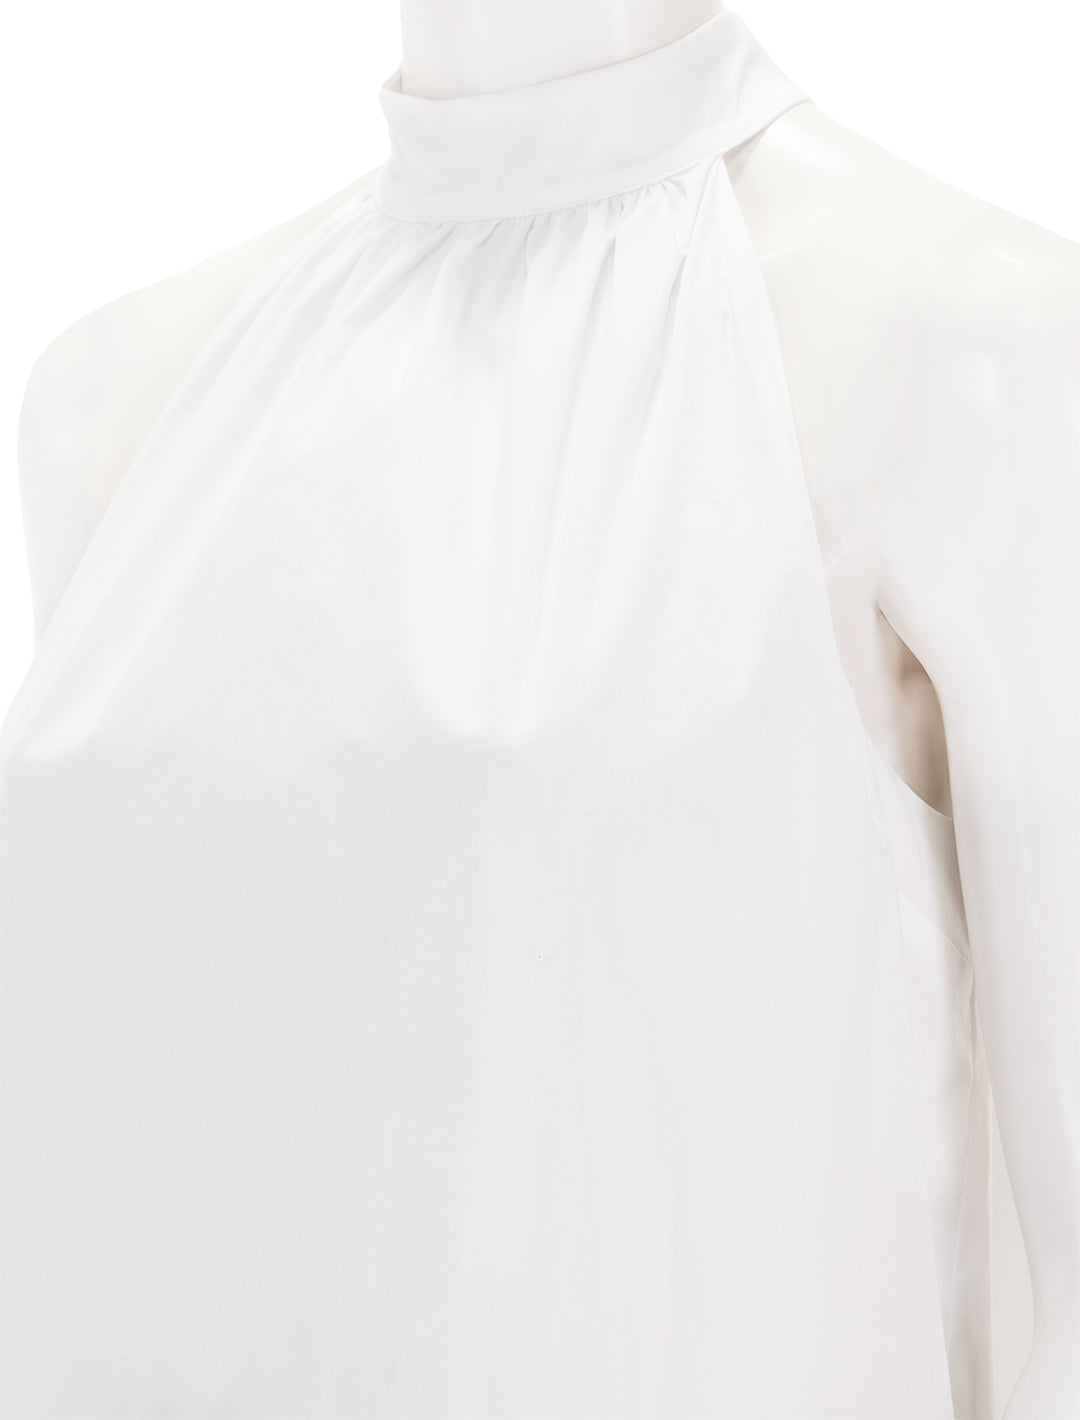 Close-up view of STAUD's marlowe dress in white.